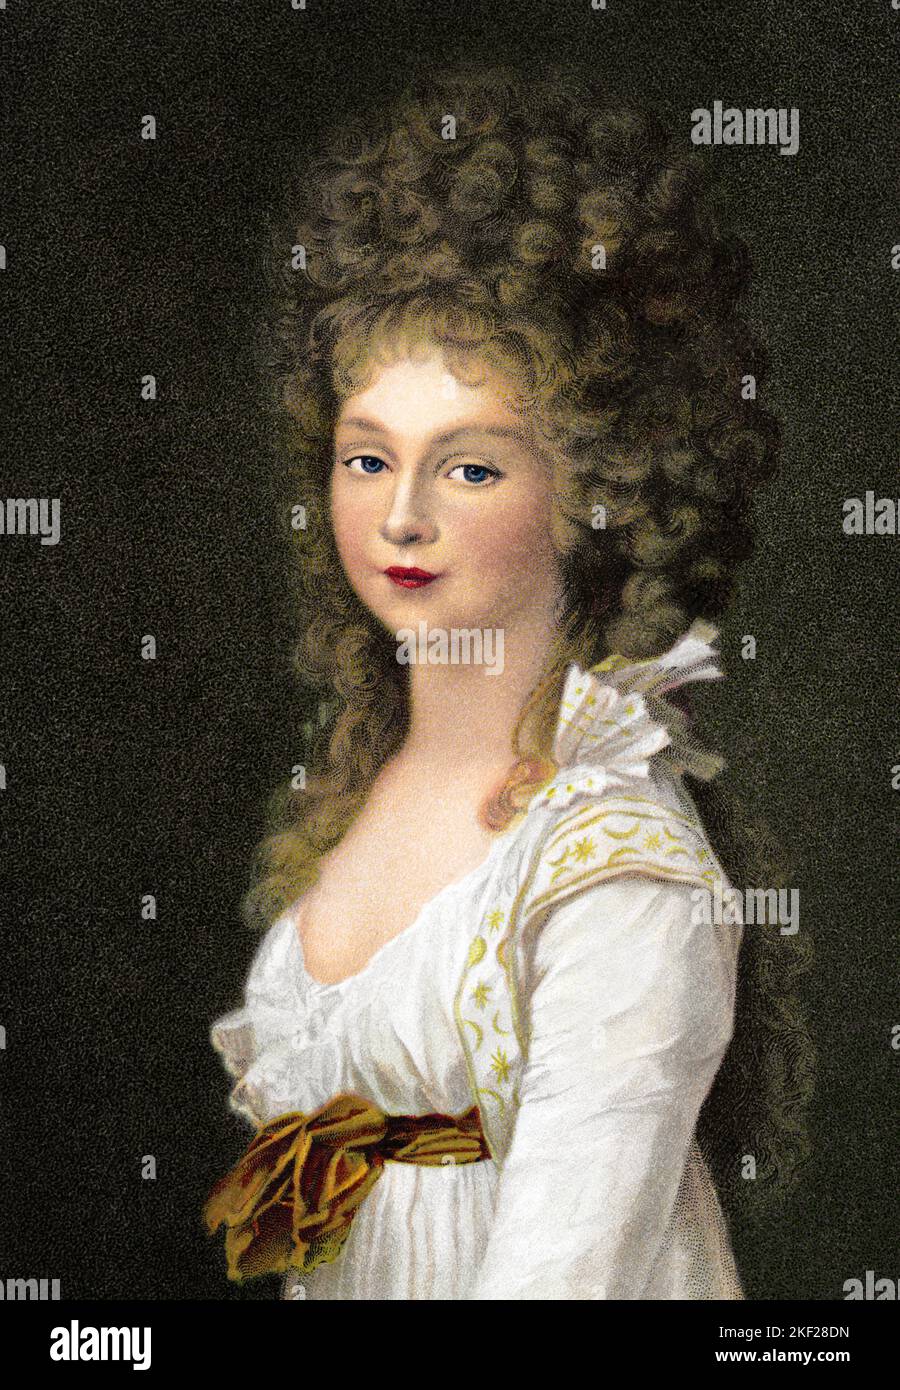 1790s PORTRAIT OF PRINCESS FREDERIKE OF PRUSSIA BY JOHANN TSCHBEIN - ka9403 HAR001 HARS EMPIRE WAIST FASHIONS YOUNG ADULT WOMAN 1790s CAUCASIAN ETHNICITY HAR001 OLD FASHIONED PRINCESS PRUSSIA Stock Photo